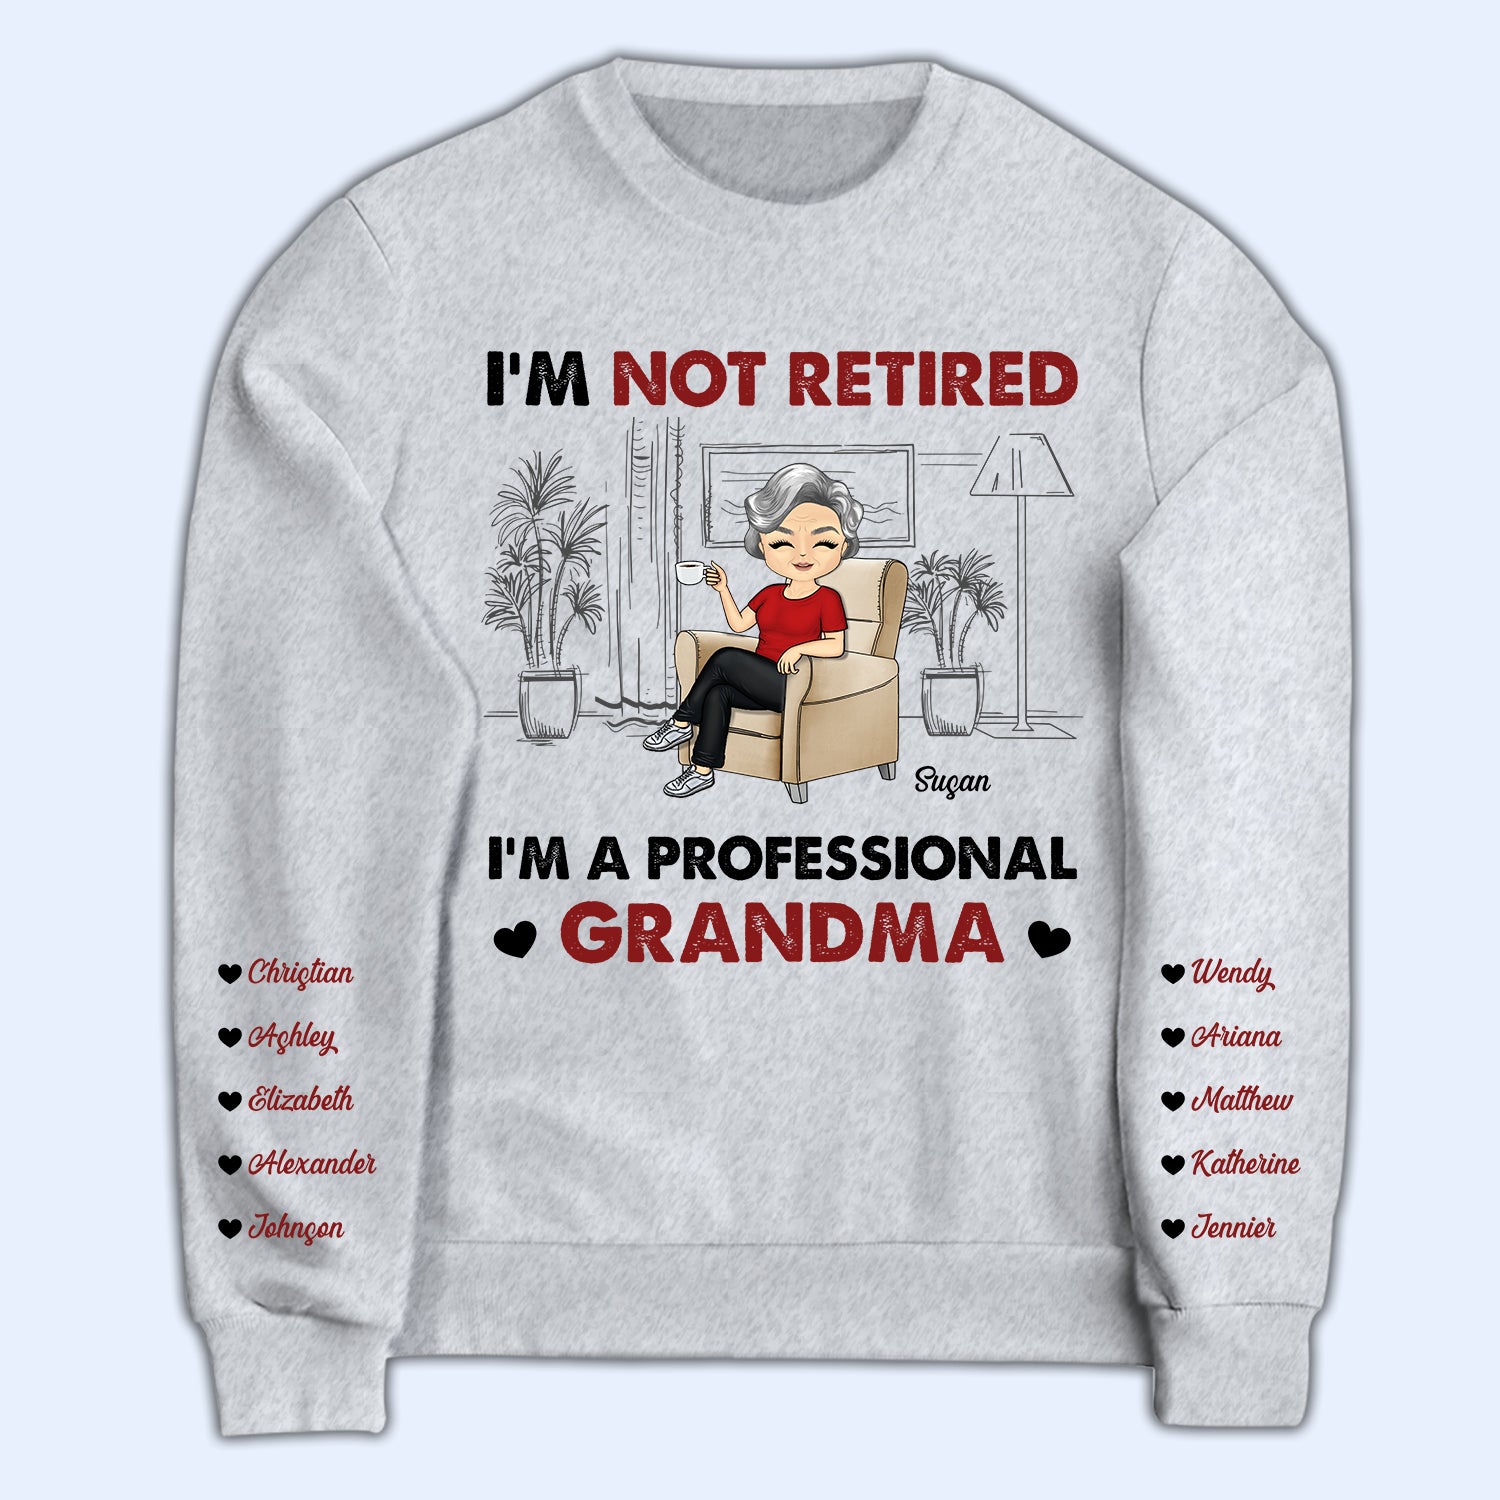 I'm Not Retired I'm A Professional Grandma - Gift For Grandma - Personalized Unisex Sweatshirt With Design On Sleeve